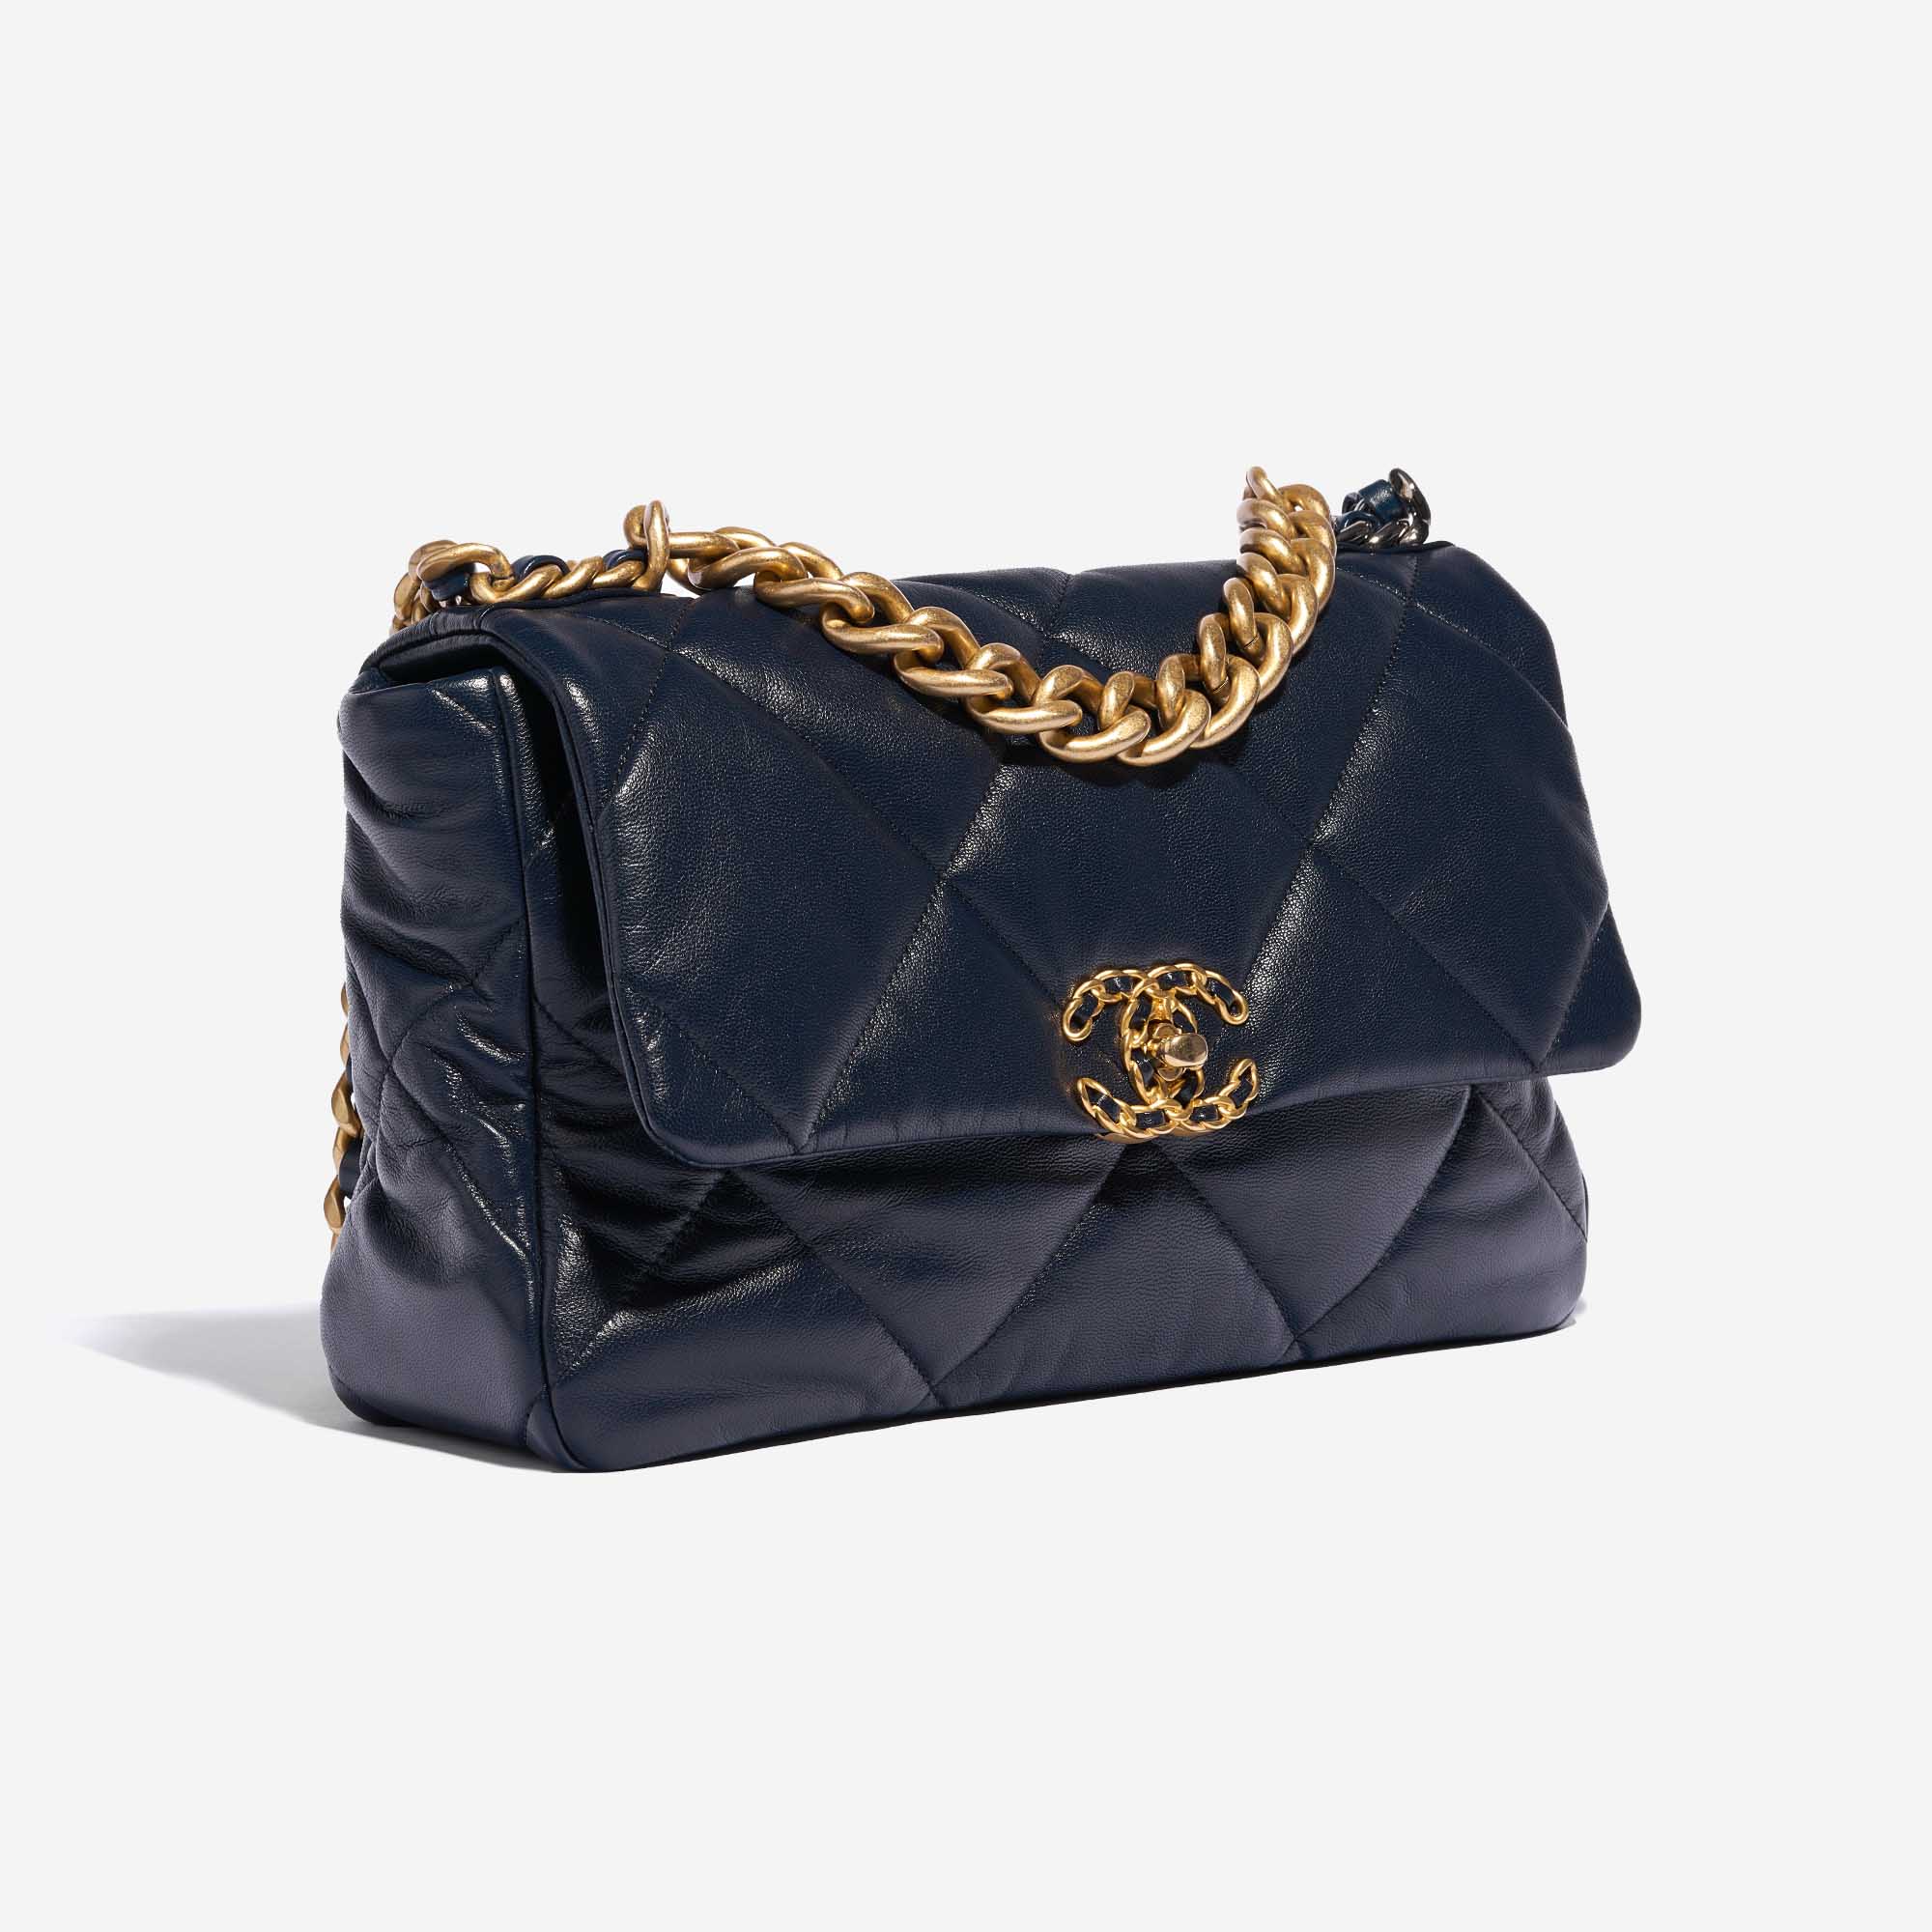 Chanel 19 leather handbag Chanel Navy in Leather - 21979220